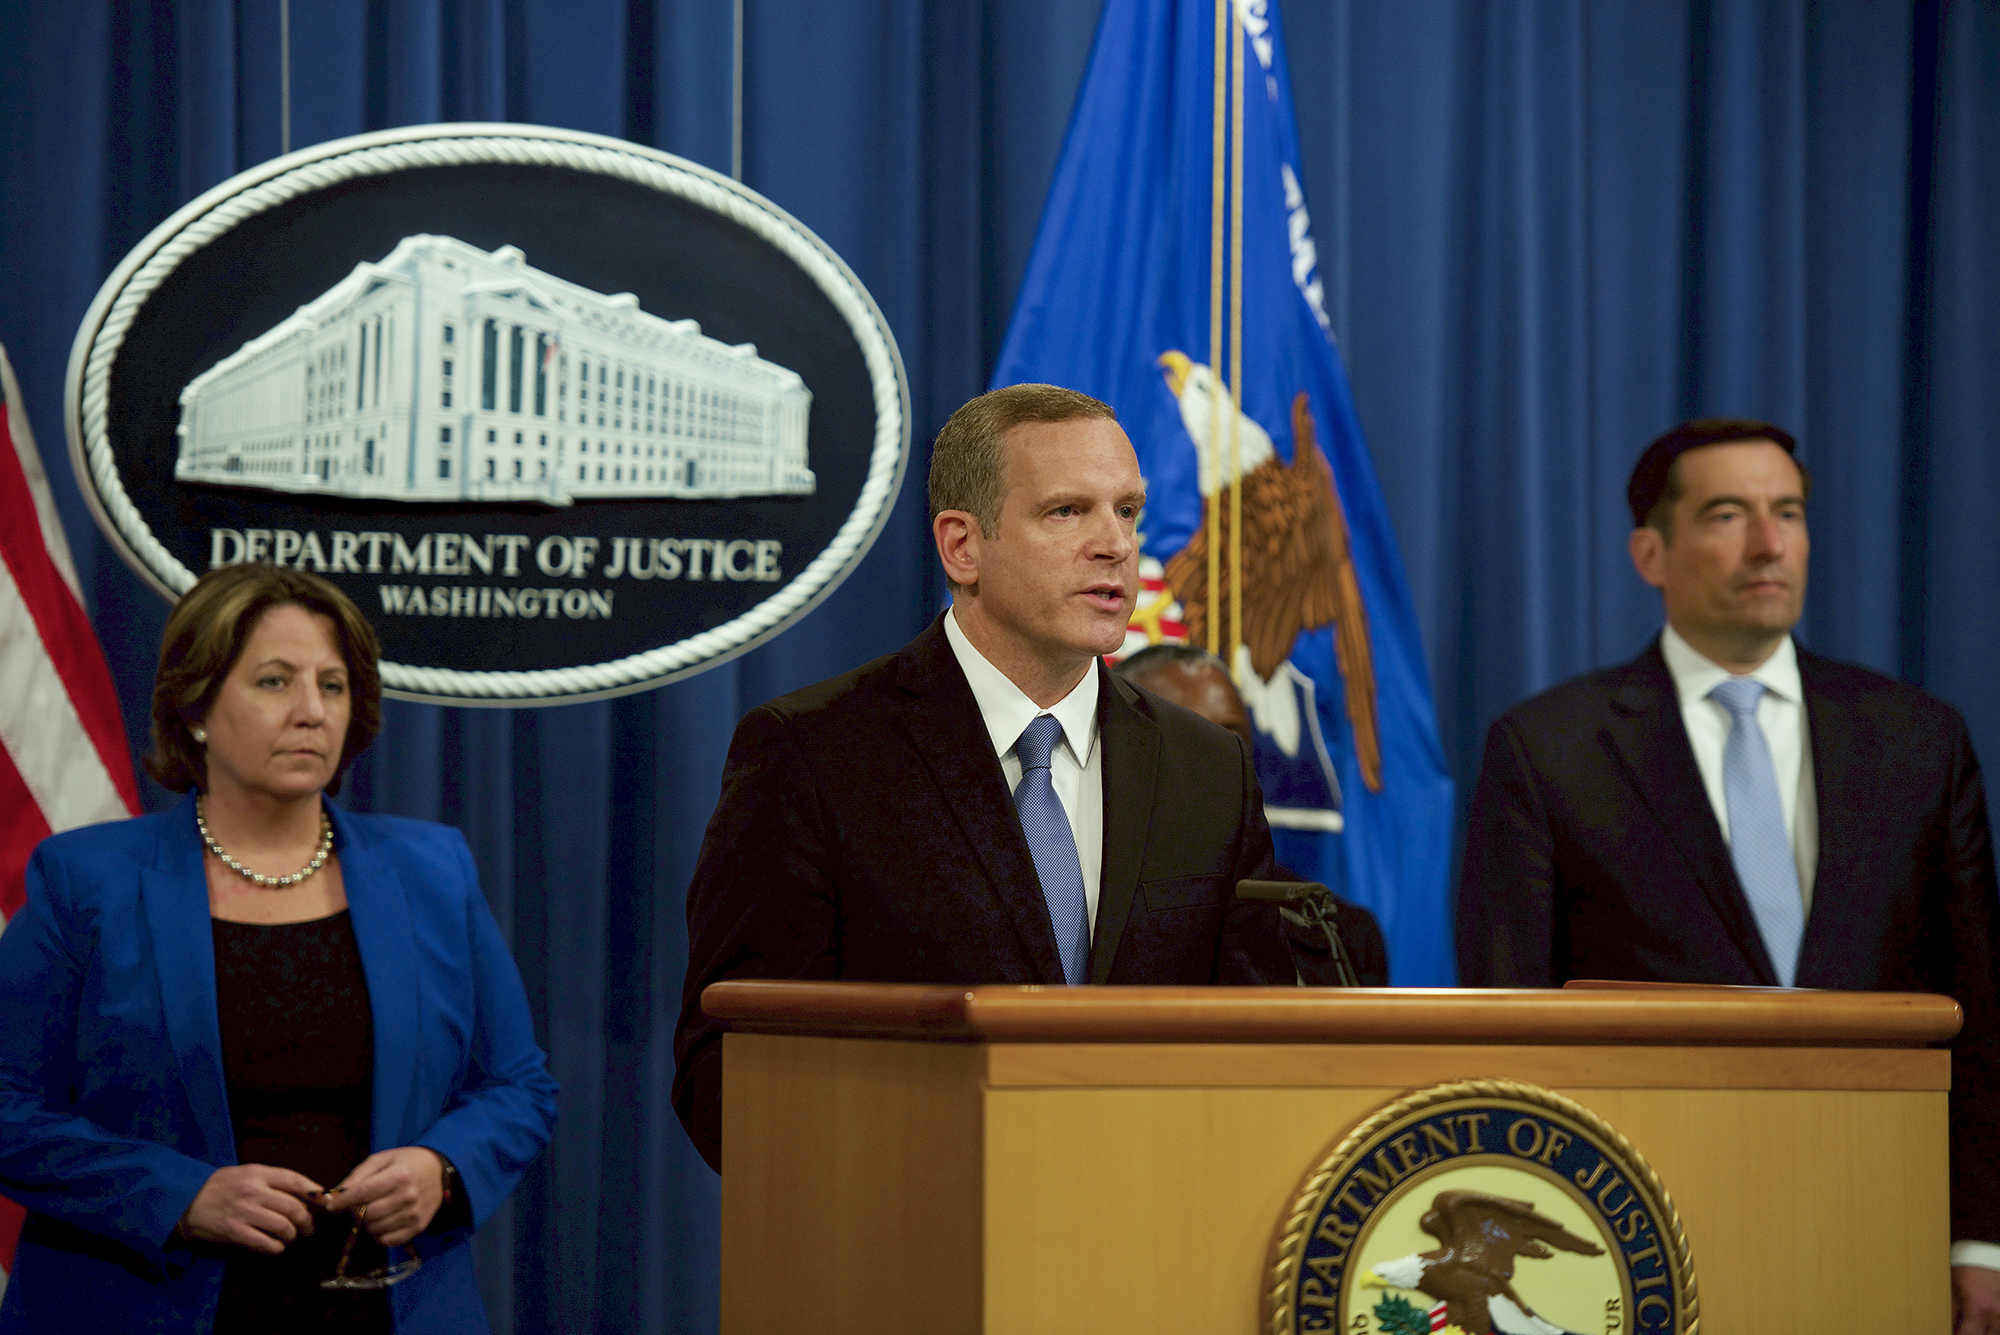 FBI Deputy Director Paul M. Abbate speaks at June 7, 2021 press conference in Washington, D.C., with Department of Justice officials announcing the seizure of ransom proceeds from the group DarkSide following the Colonial Pipeline network compromise.